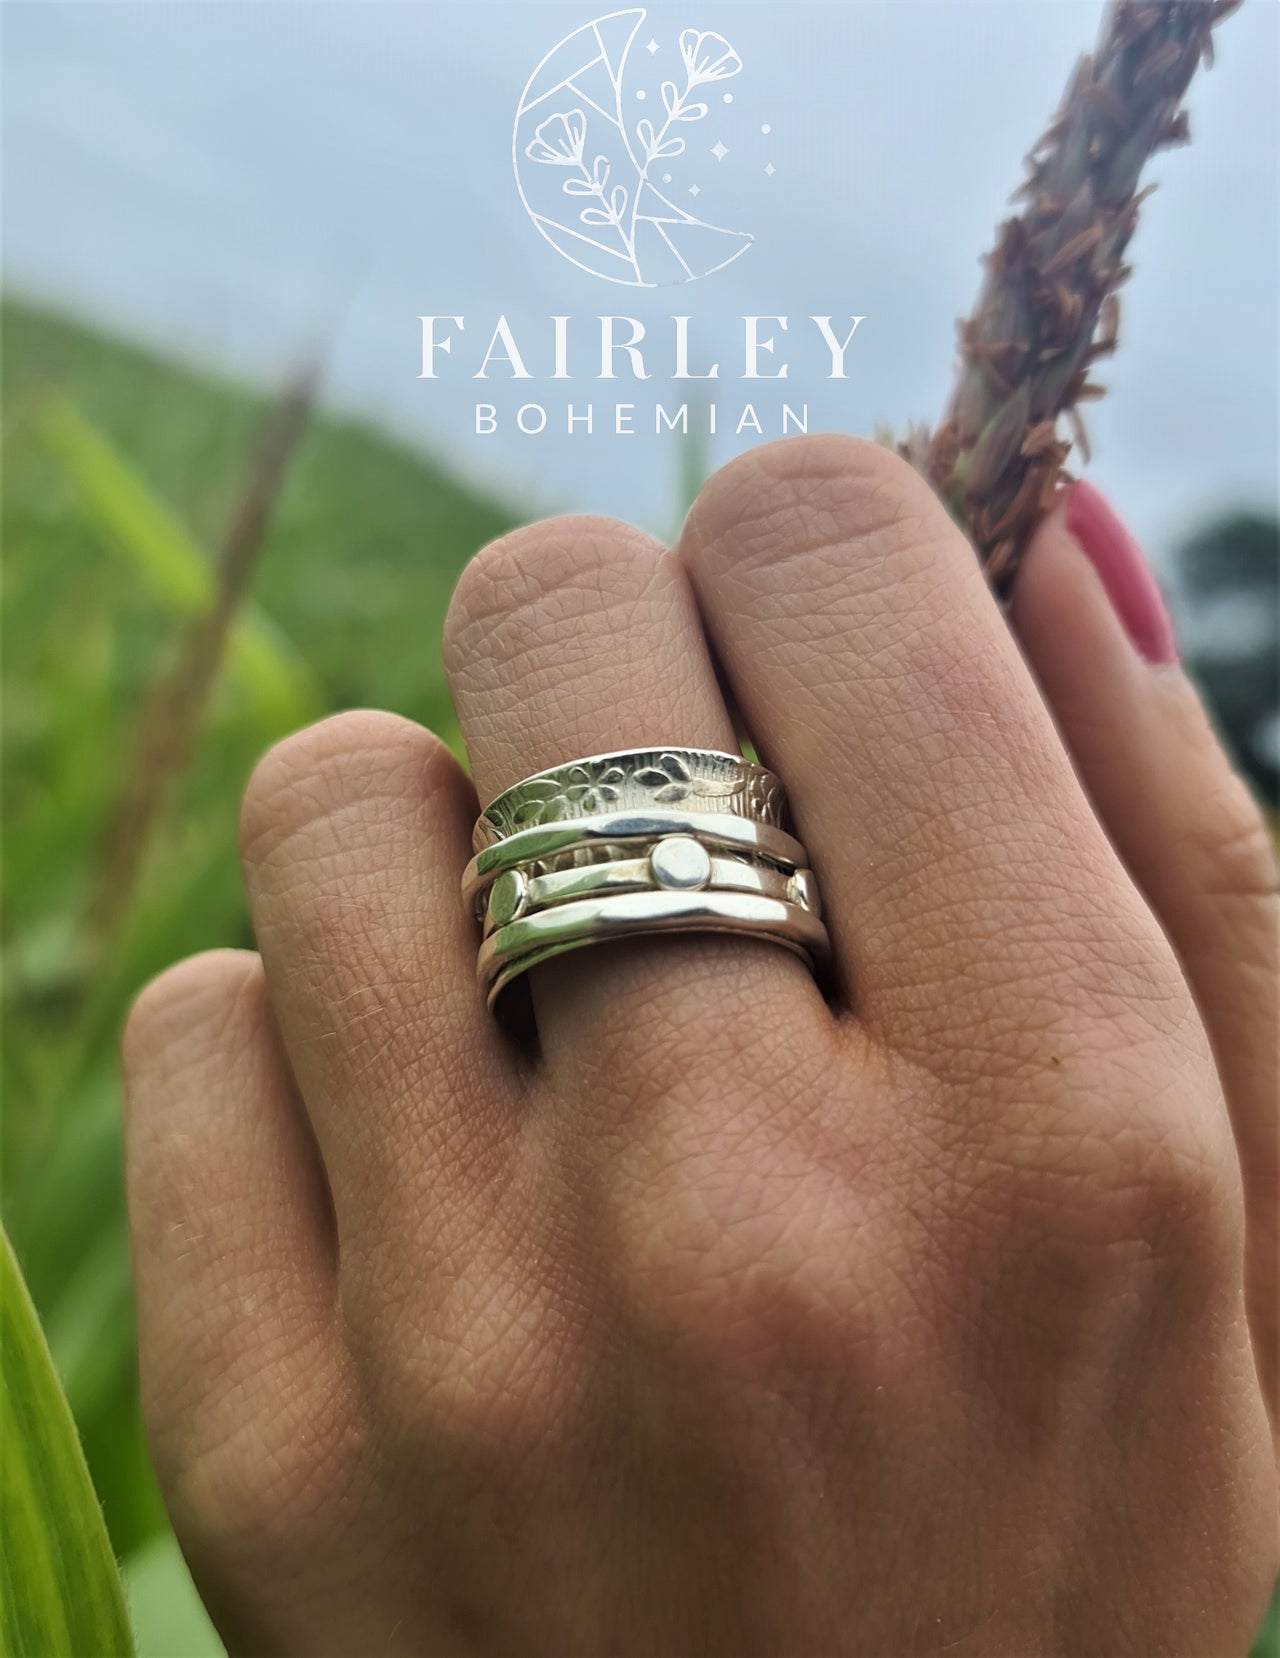 bohemian spinner ring anxiety fidget worry ring in solid sterling silver on hand model jungle